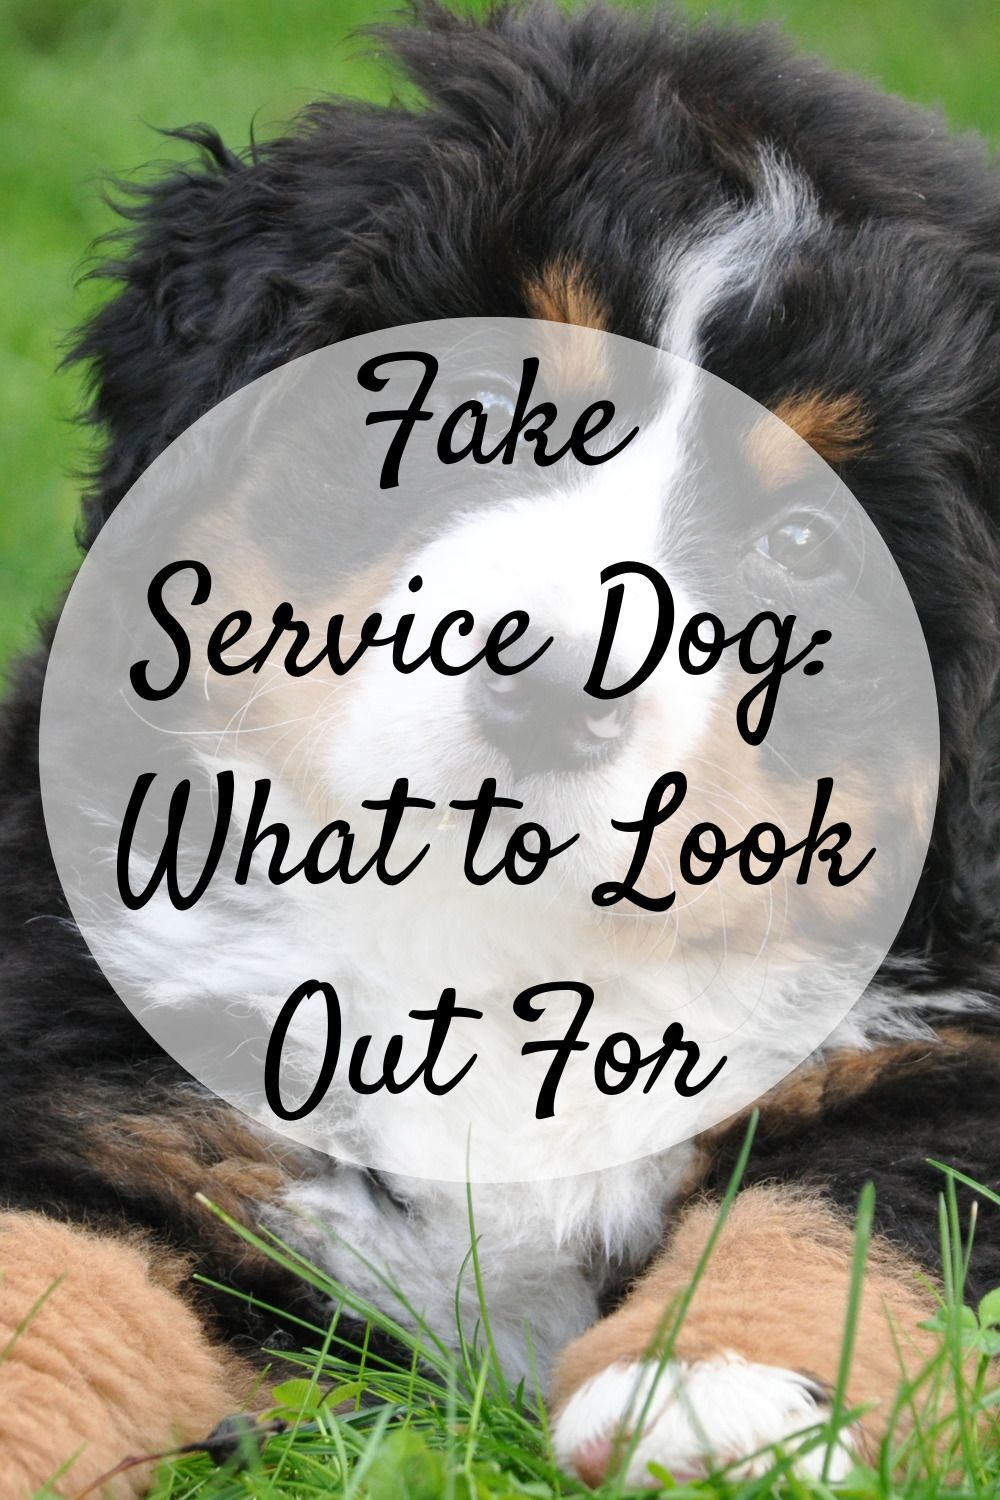 Fake Service Dog: What to Look Out For